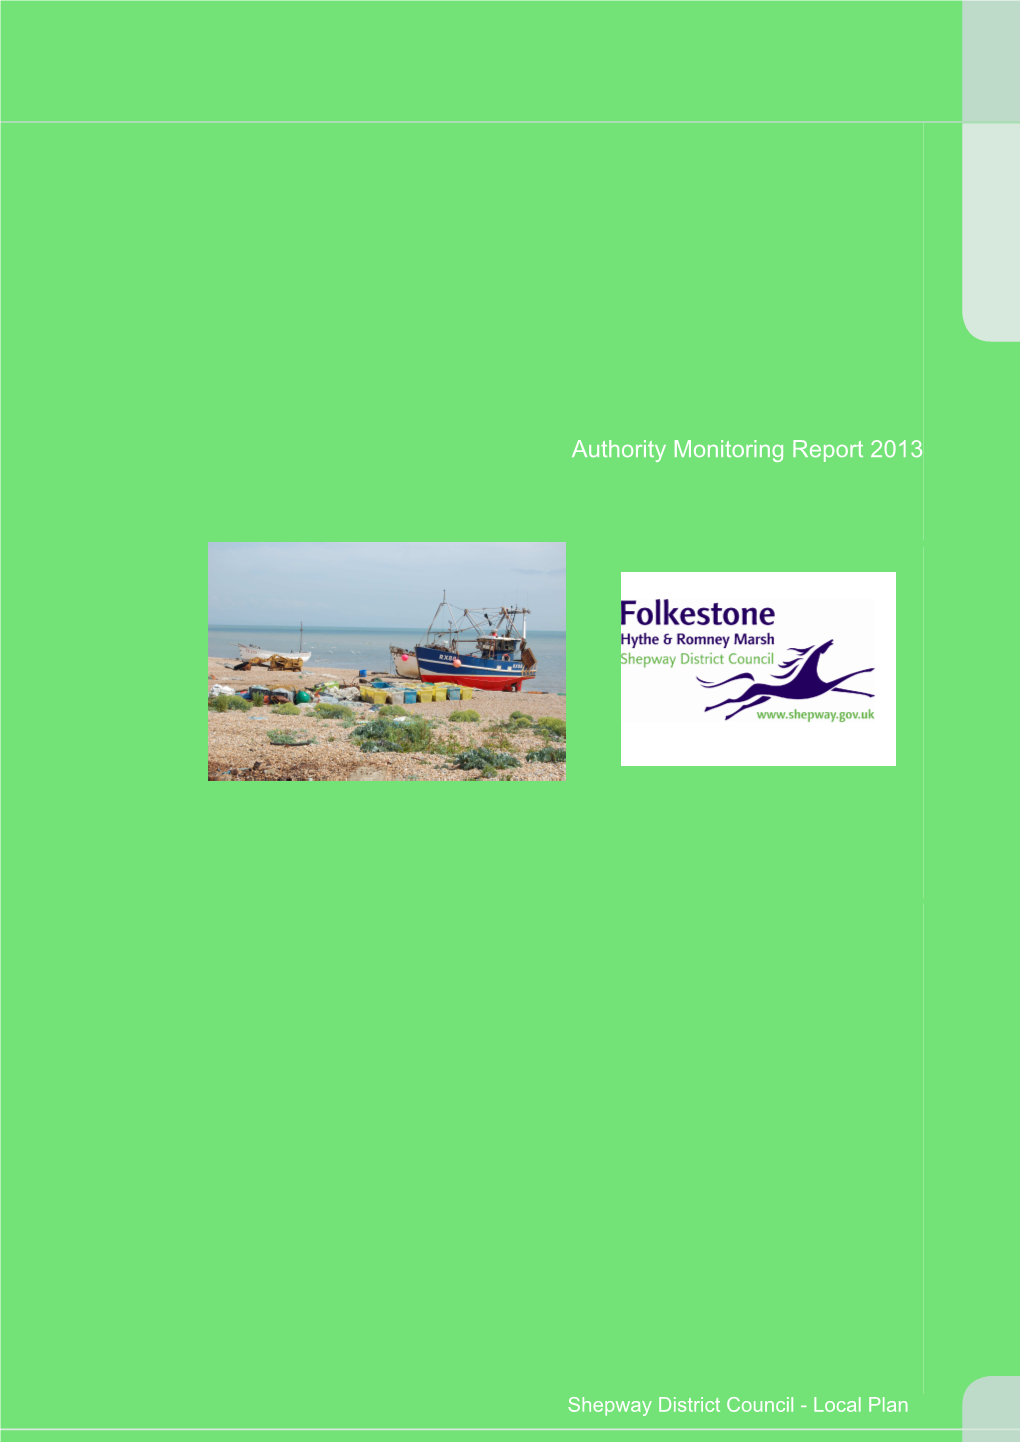 Authority Monitoring Report 2013